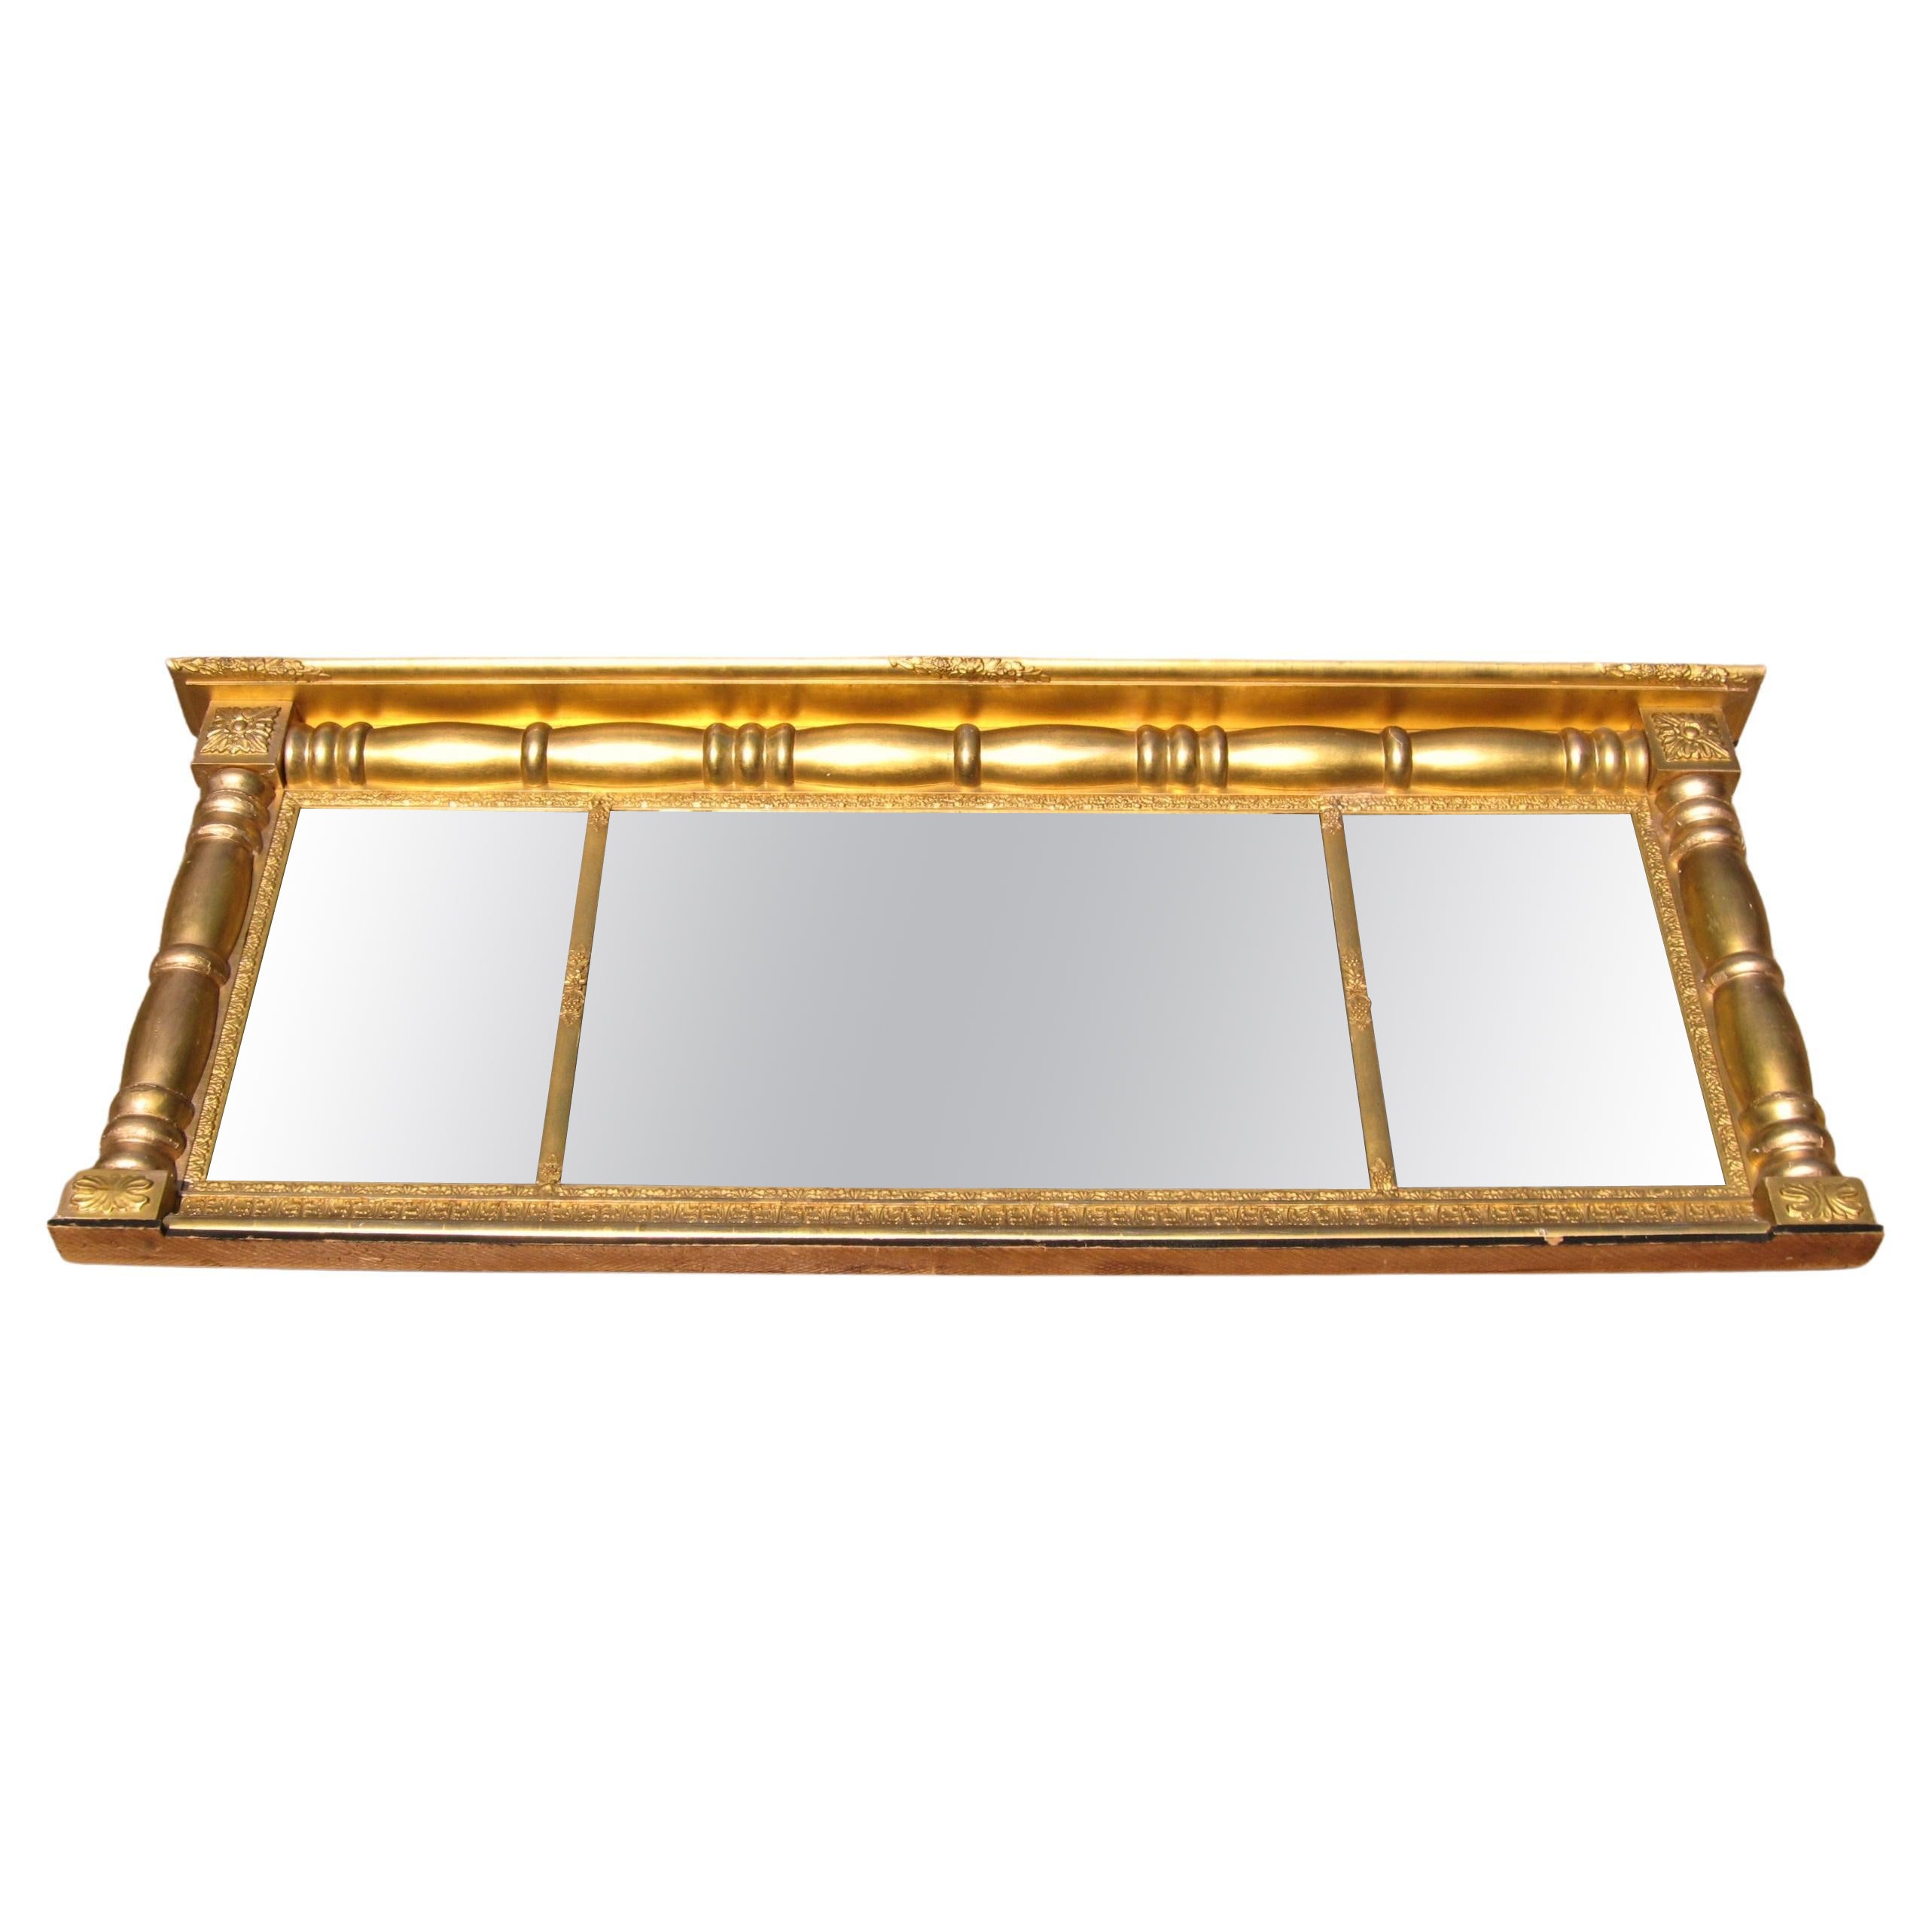 Neoclassical Gold Leaf Gilt Mirror 3 Sections For Sale